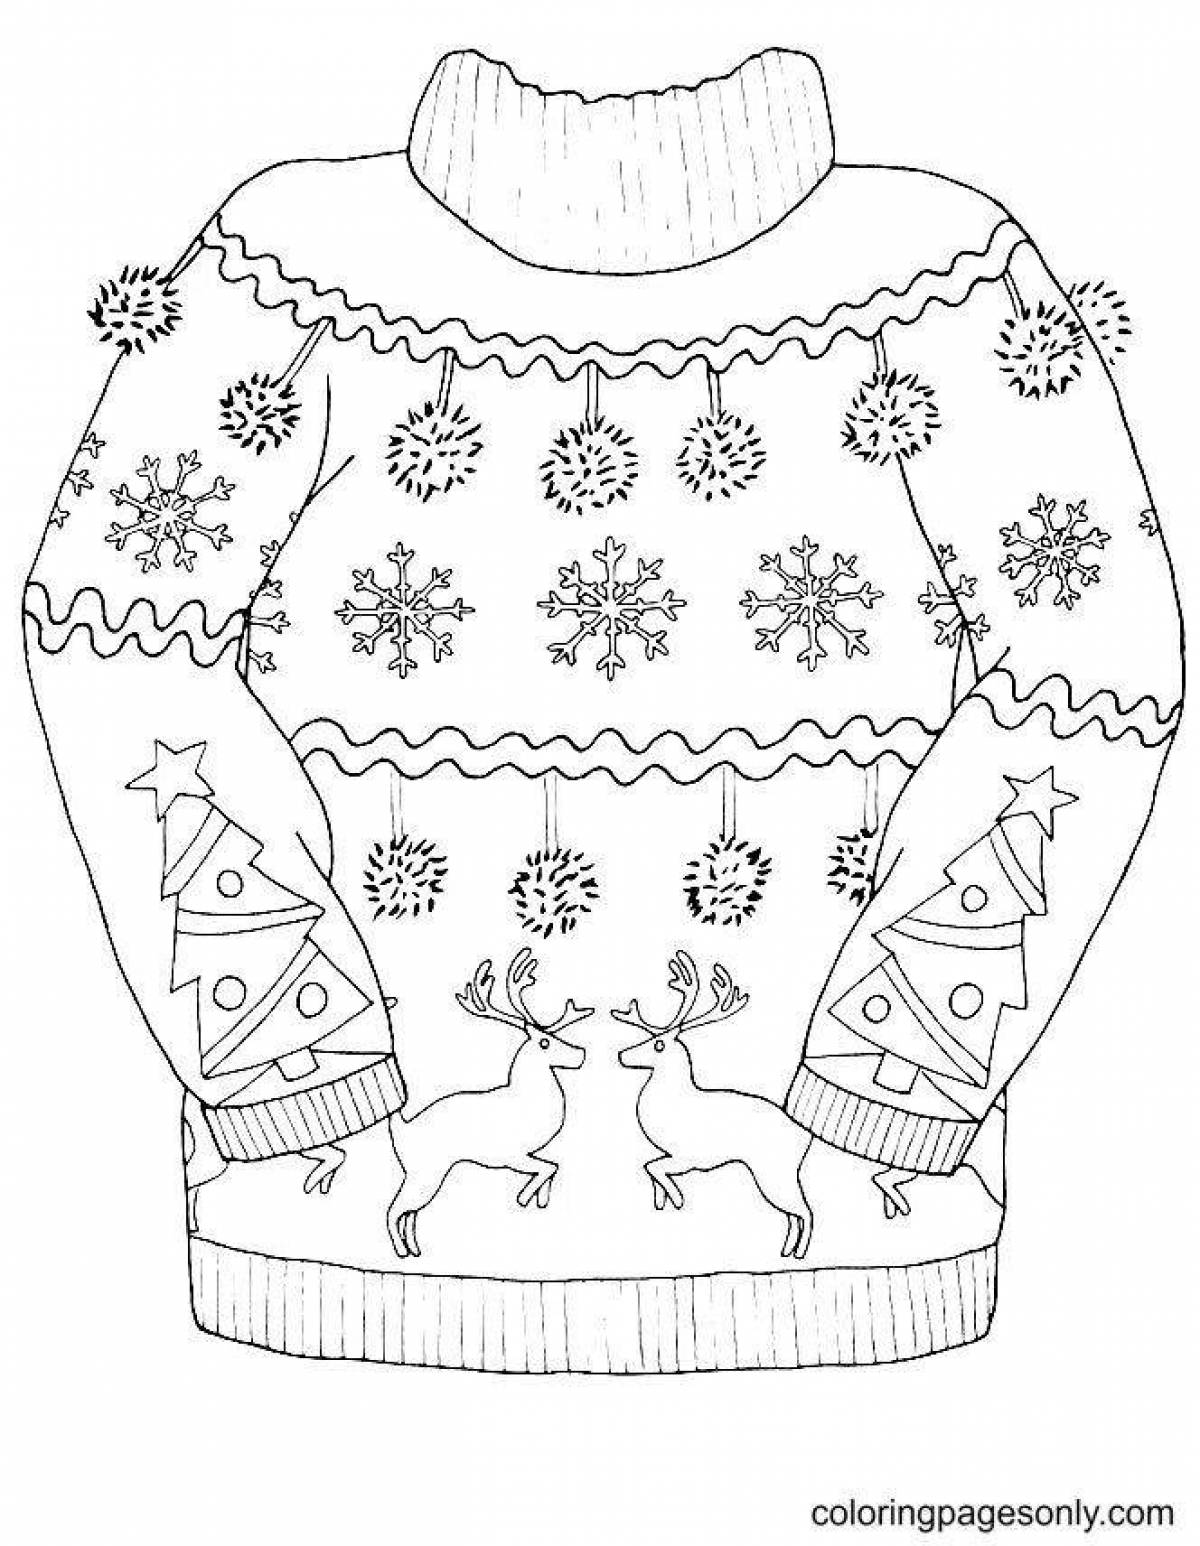 Spectacular sweater coloring for children 4-5 years old